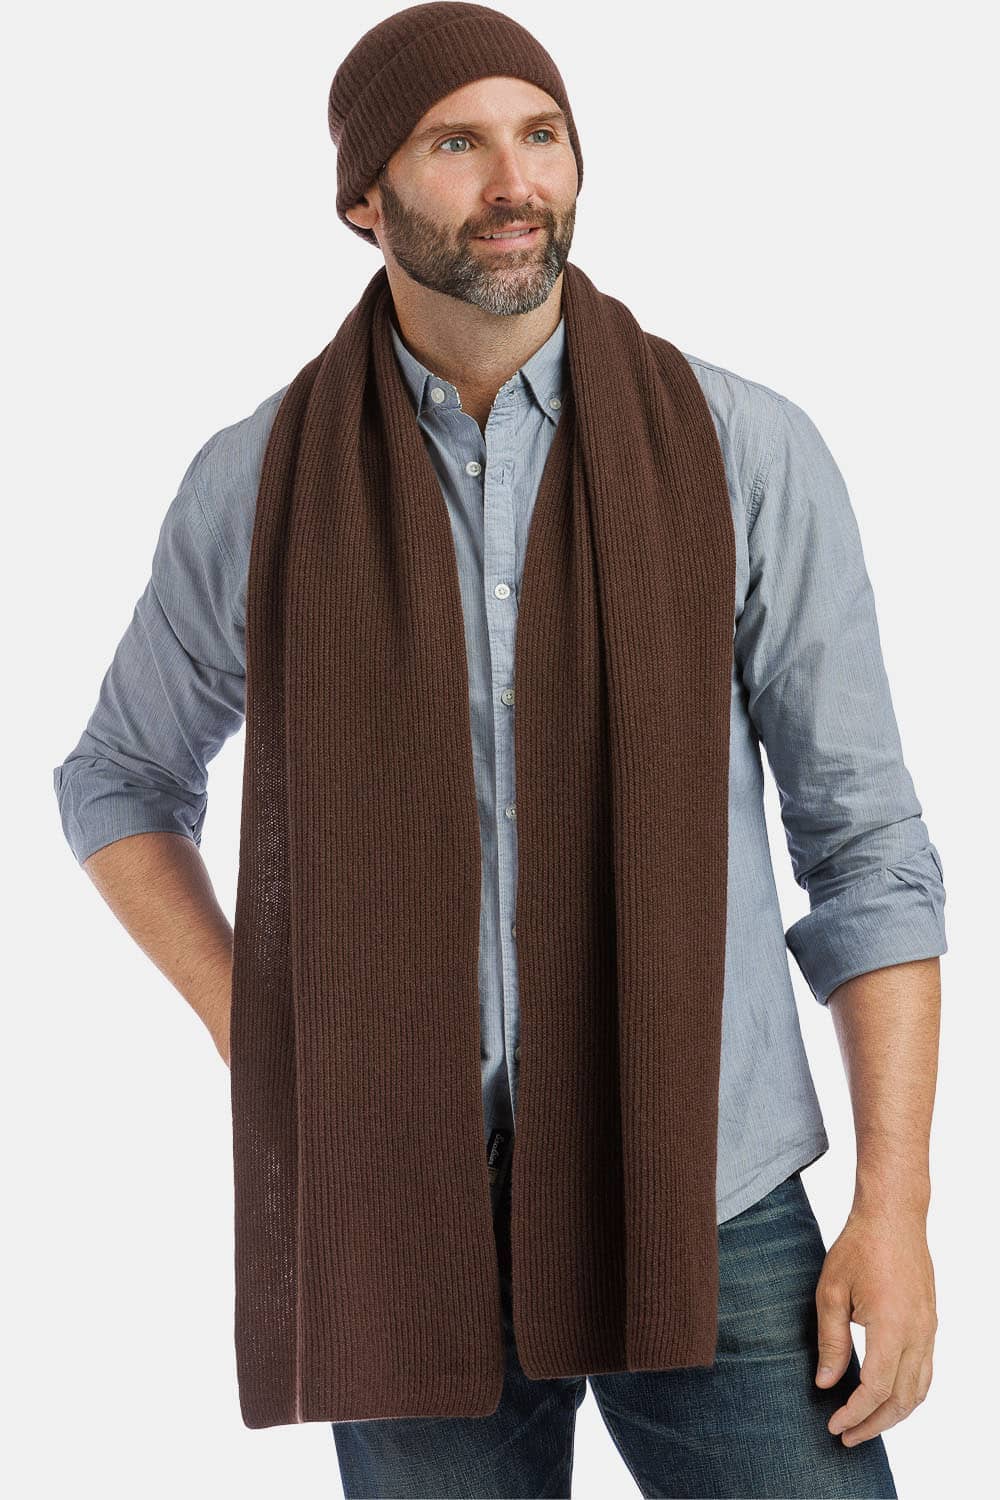 Fishers Finery Men's Classic Cashmere Scarf